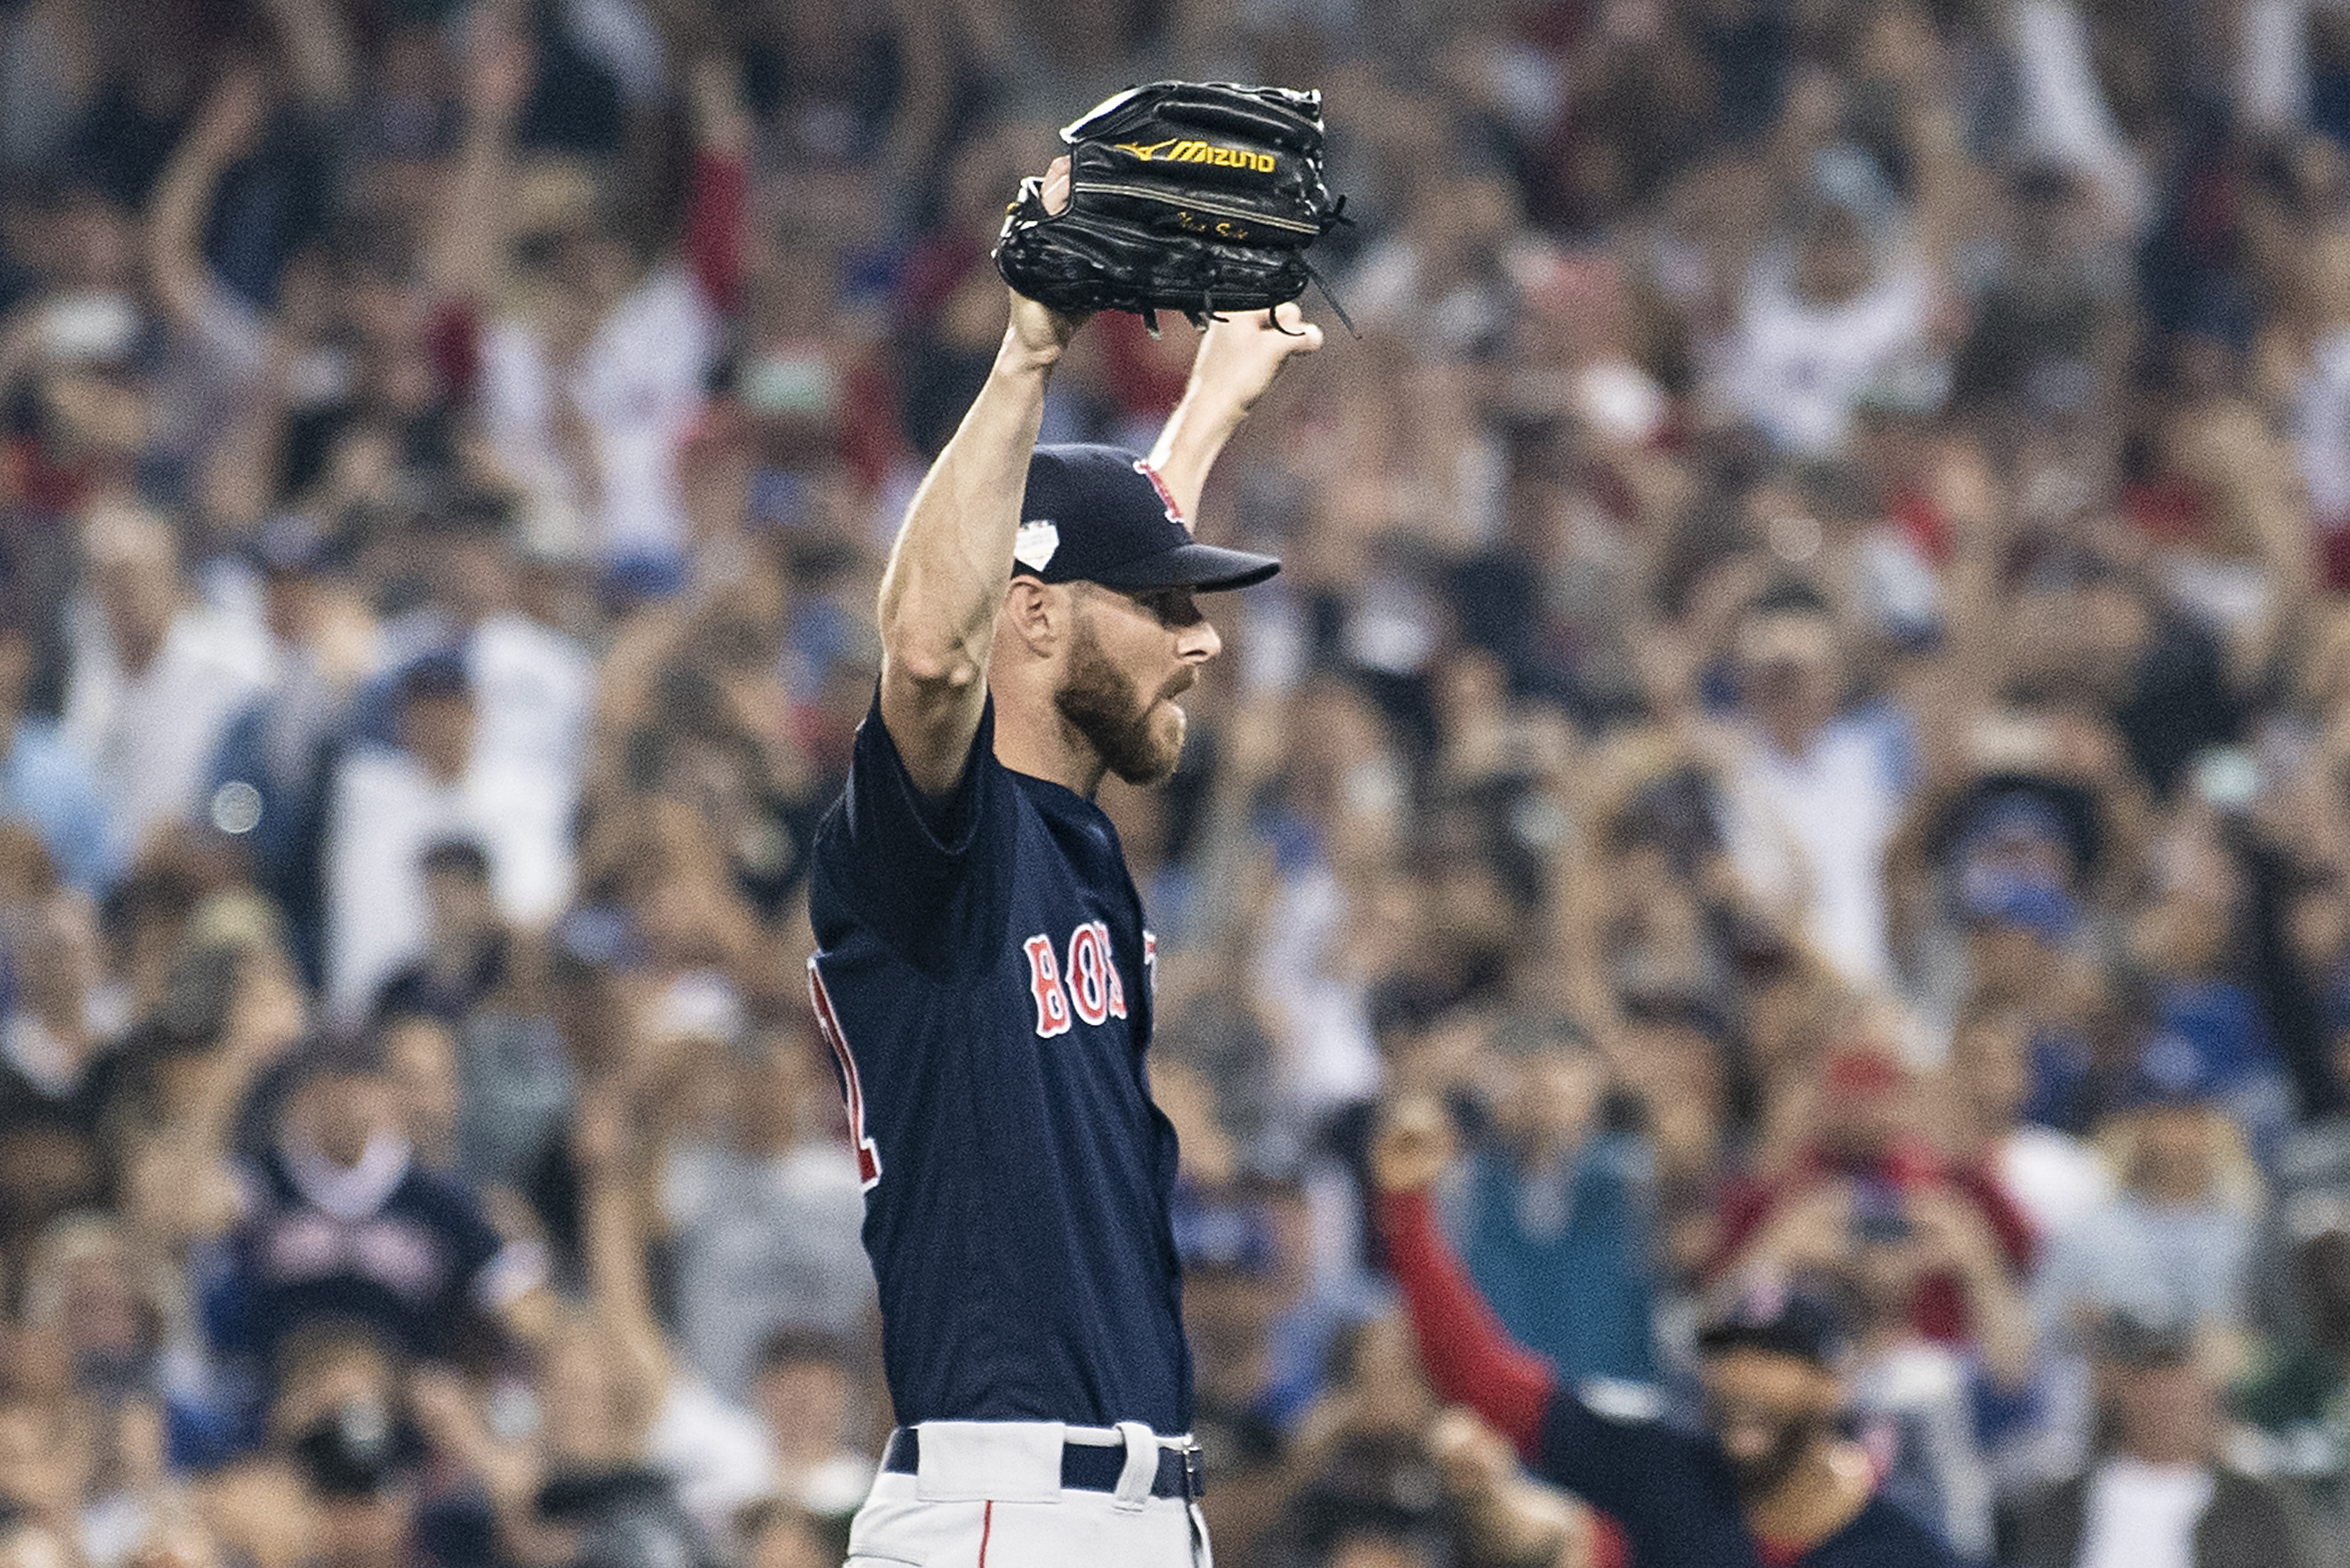 Yankees 4, Red Sox 1: Chris Sale throws gem, but New York prevails in 16